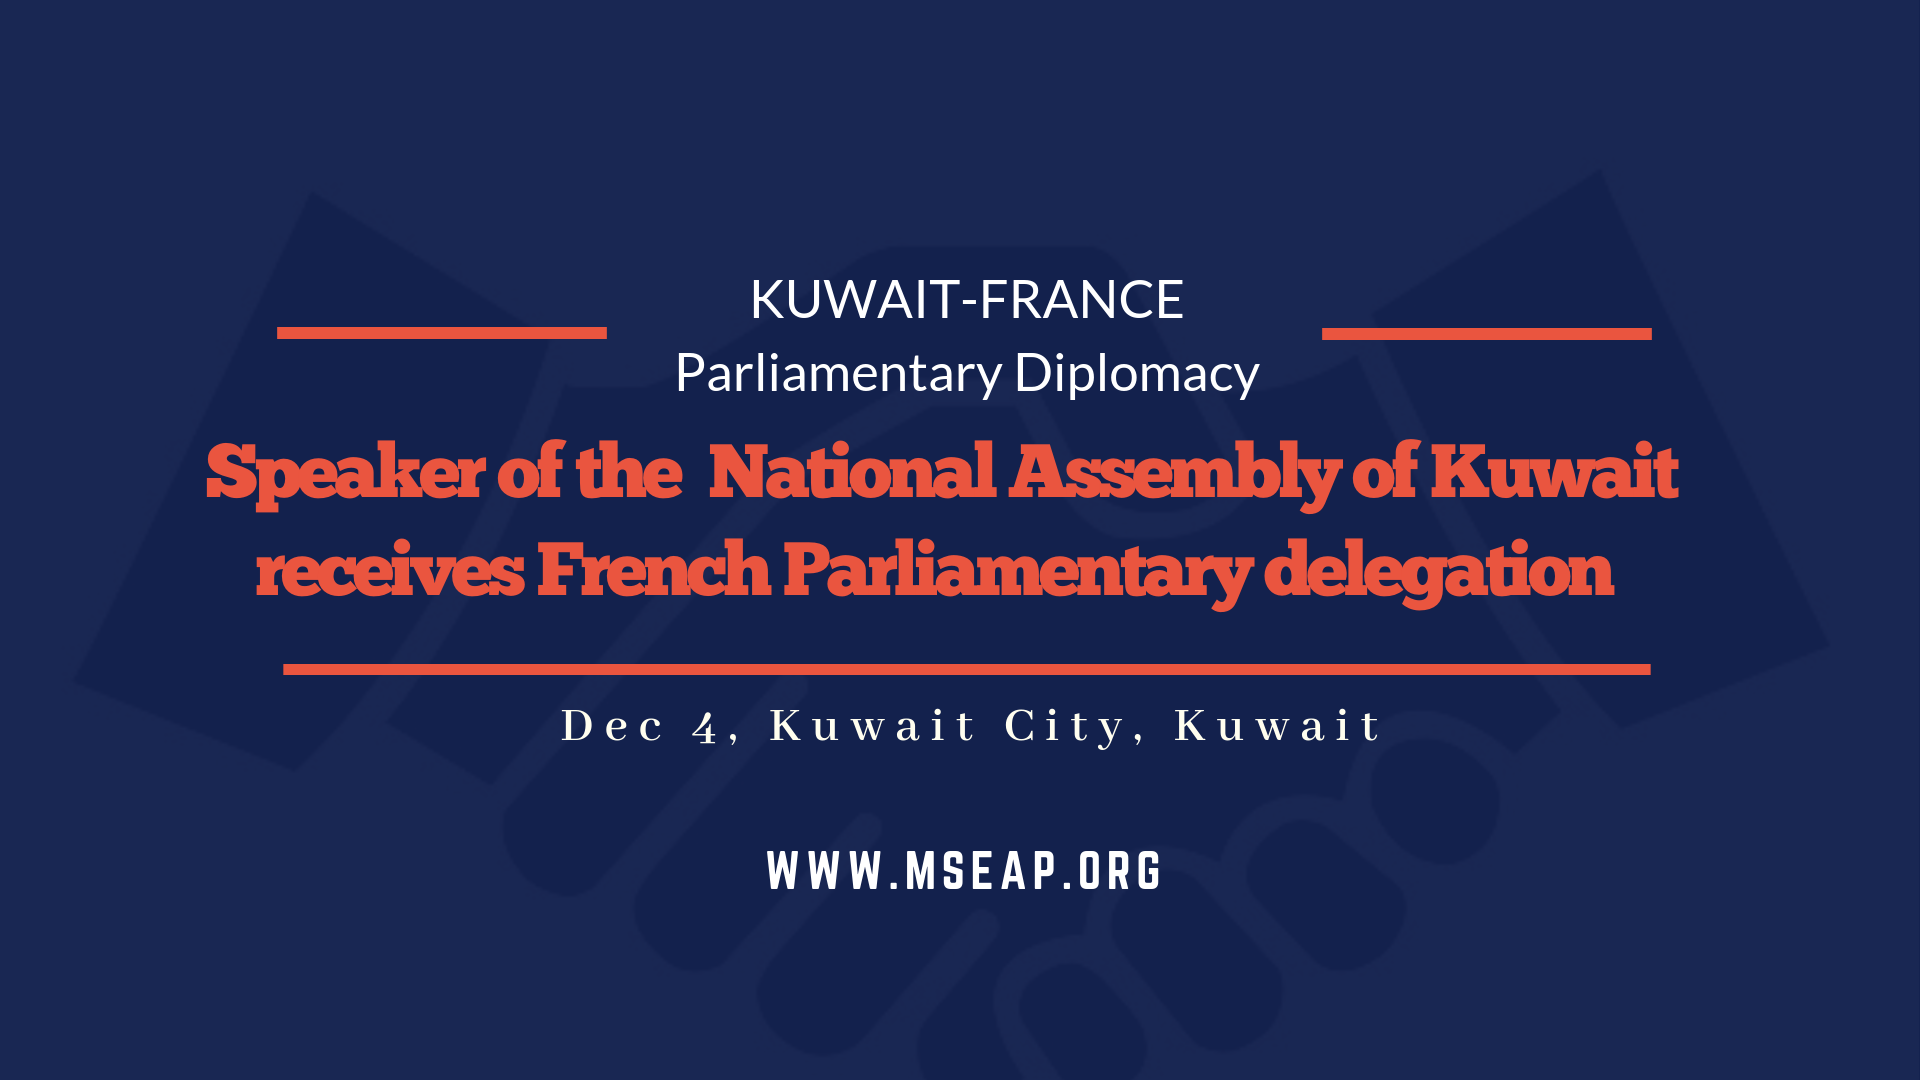 Kuwaiti National Assembly Speaker receives French parliamentary delegation in Kuwait City